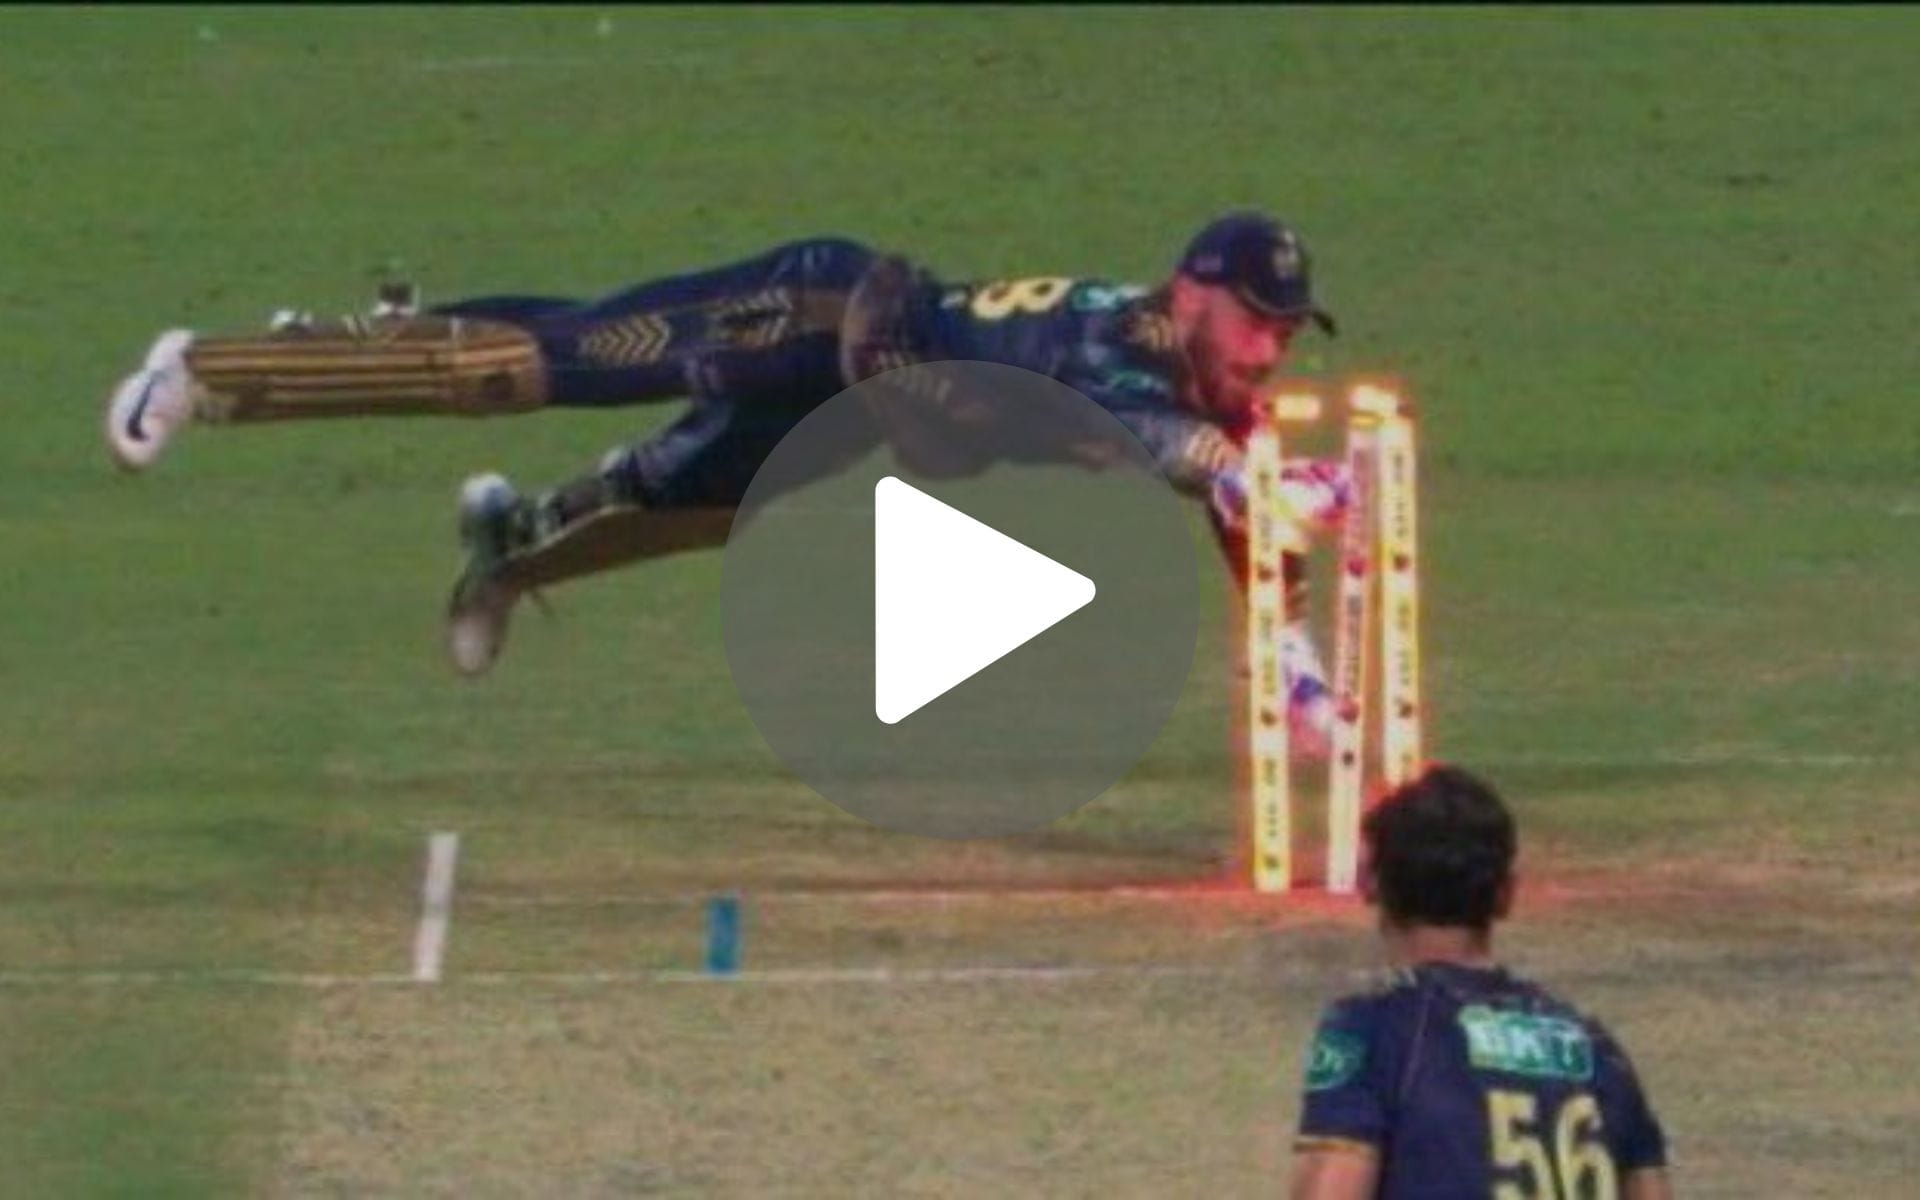 [Watch] Phil Salt’s Jaw-Dropping Run Out Saves Starc’s Humiliation In KKR Vs RCB Thriller